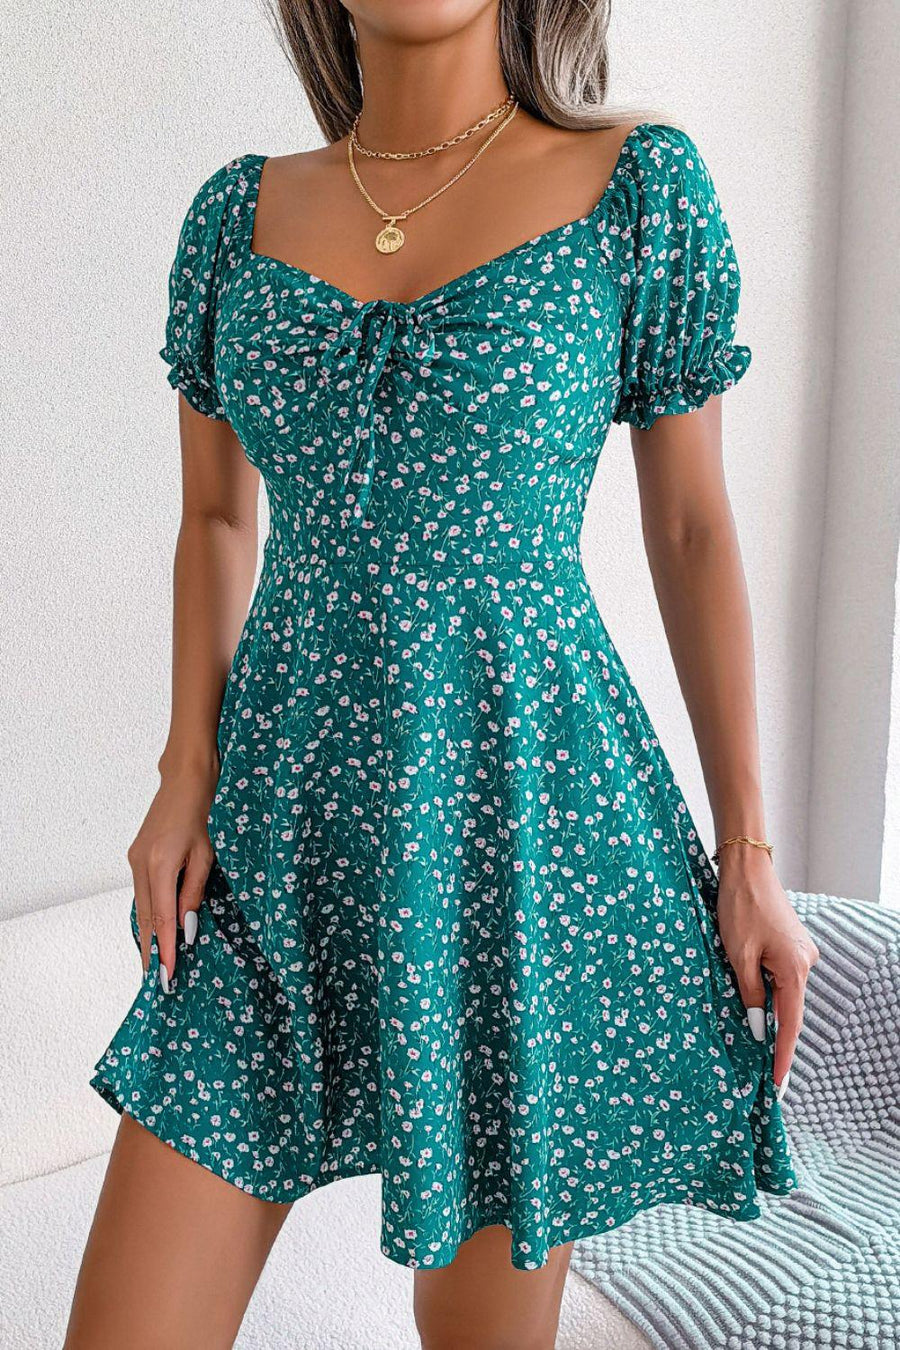 Chic and Comfy Floral A-Line Dress with Tie Front and Square Open Back Dresses - Chuzko Women Clothing